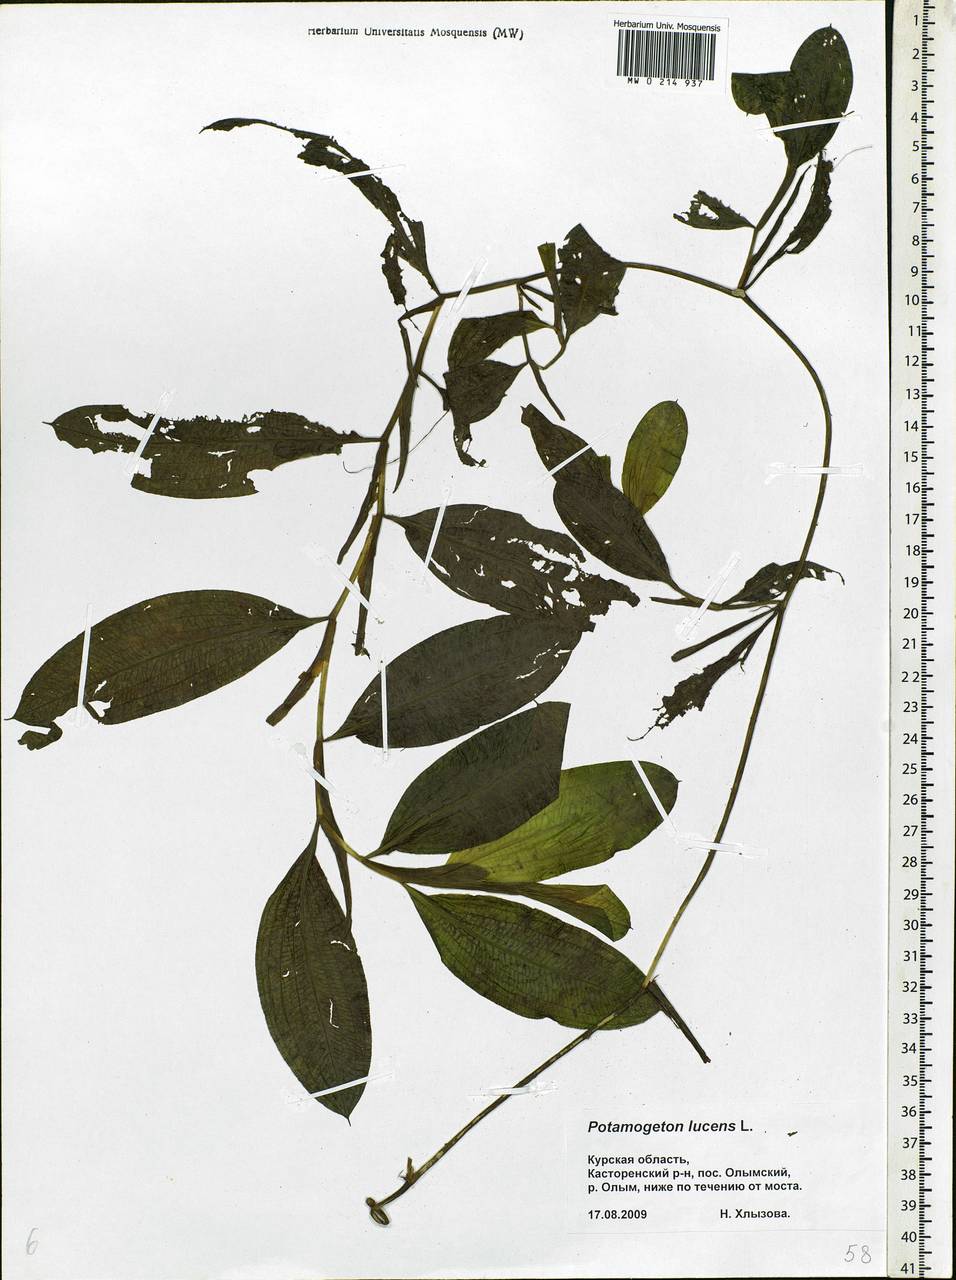 Potamogeton lucens L., Eastern Europe, Central forest-and-steppe region (E6) (Russia)